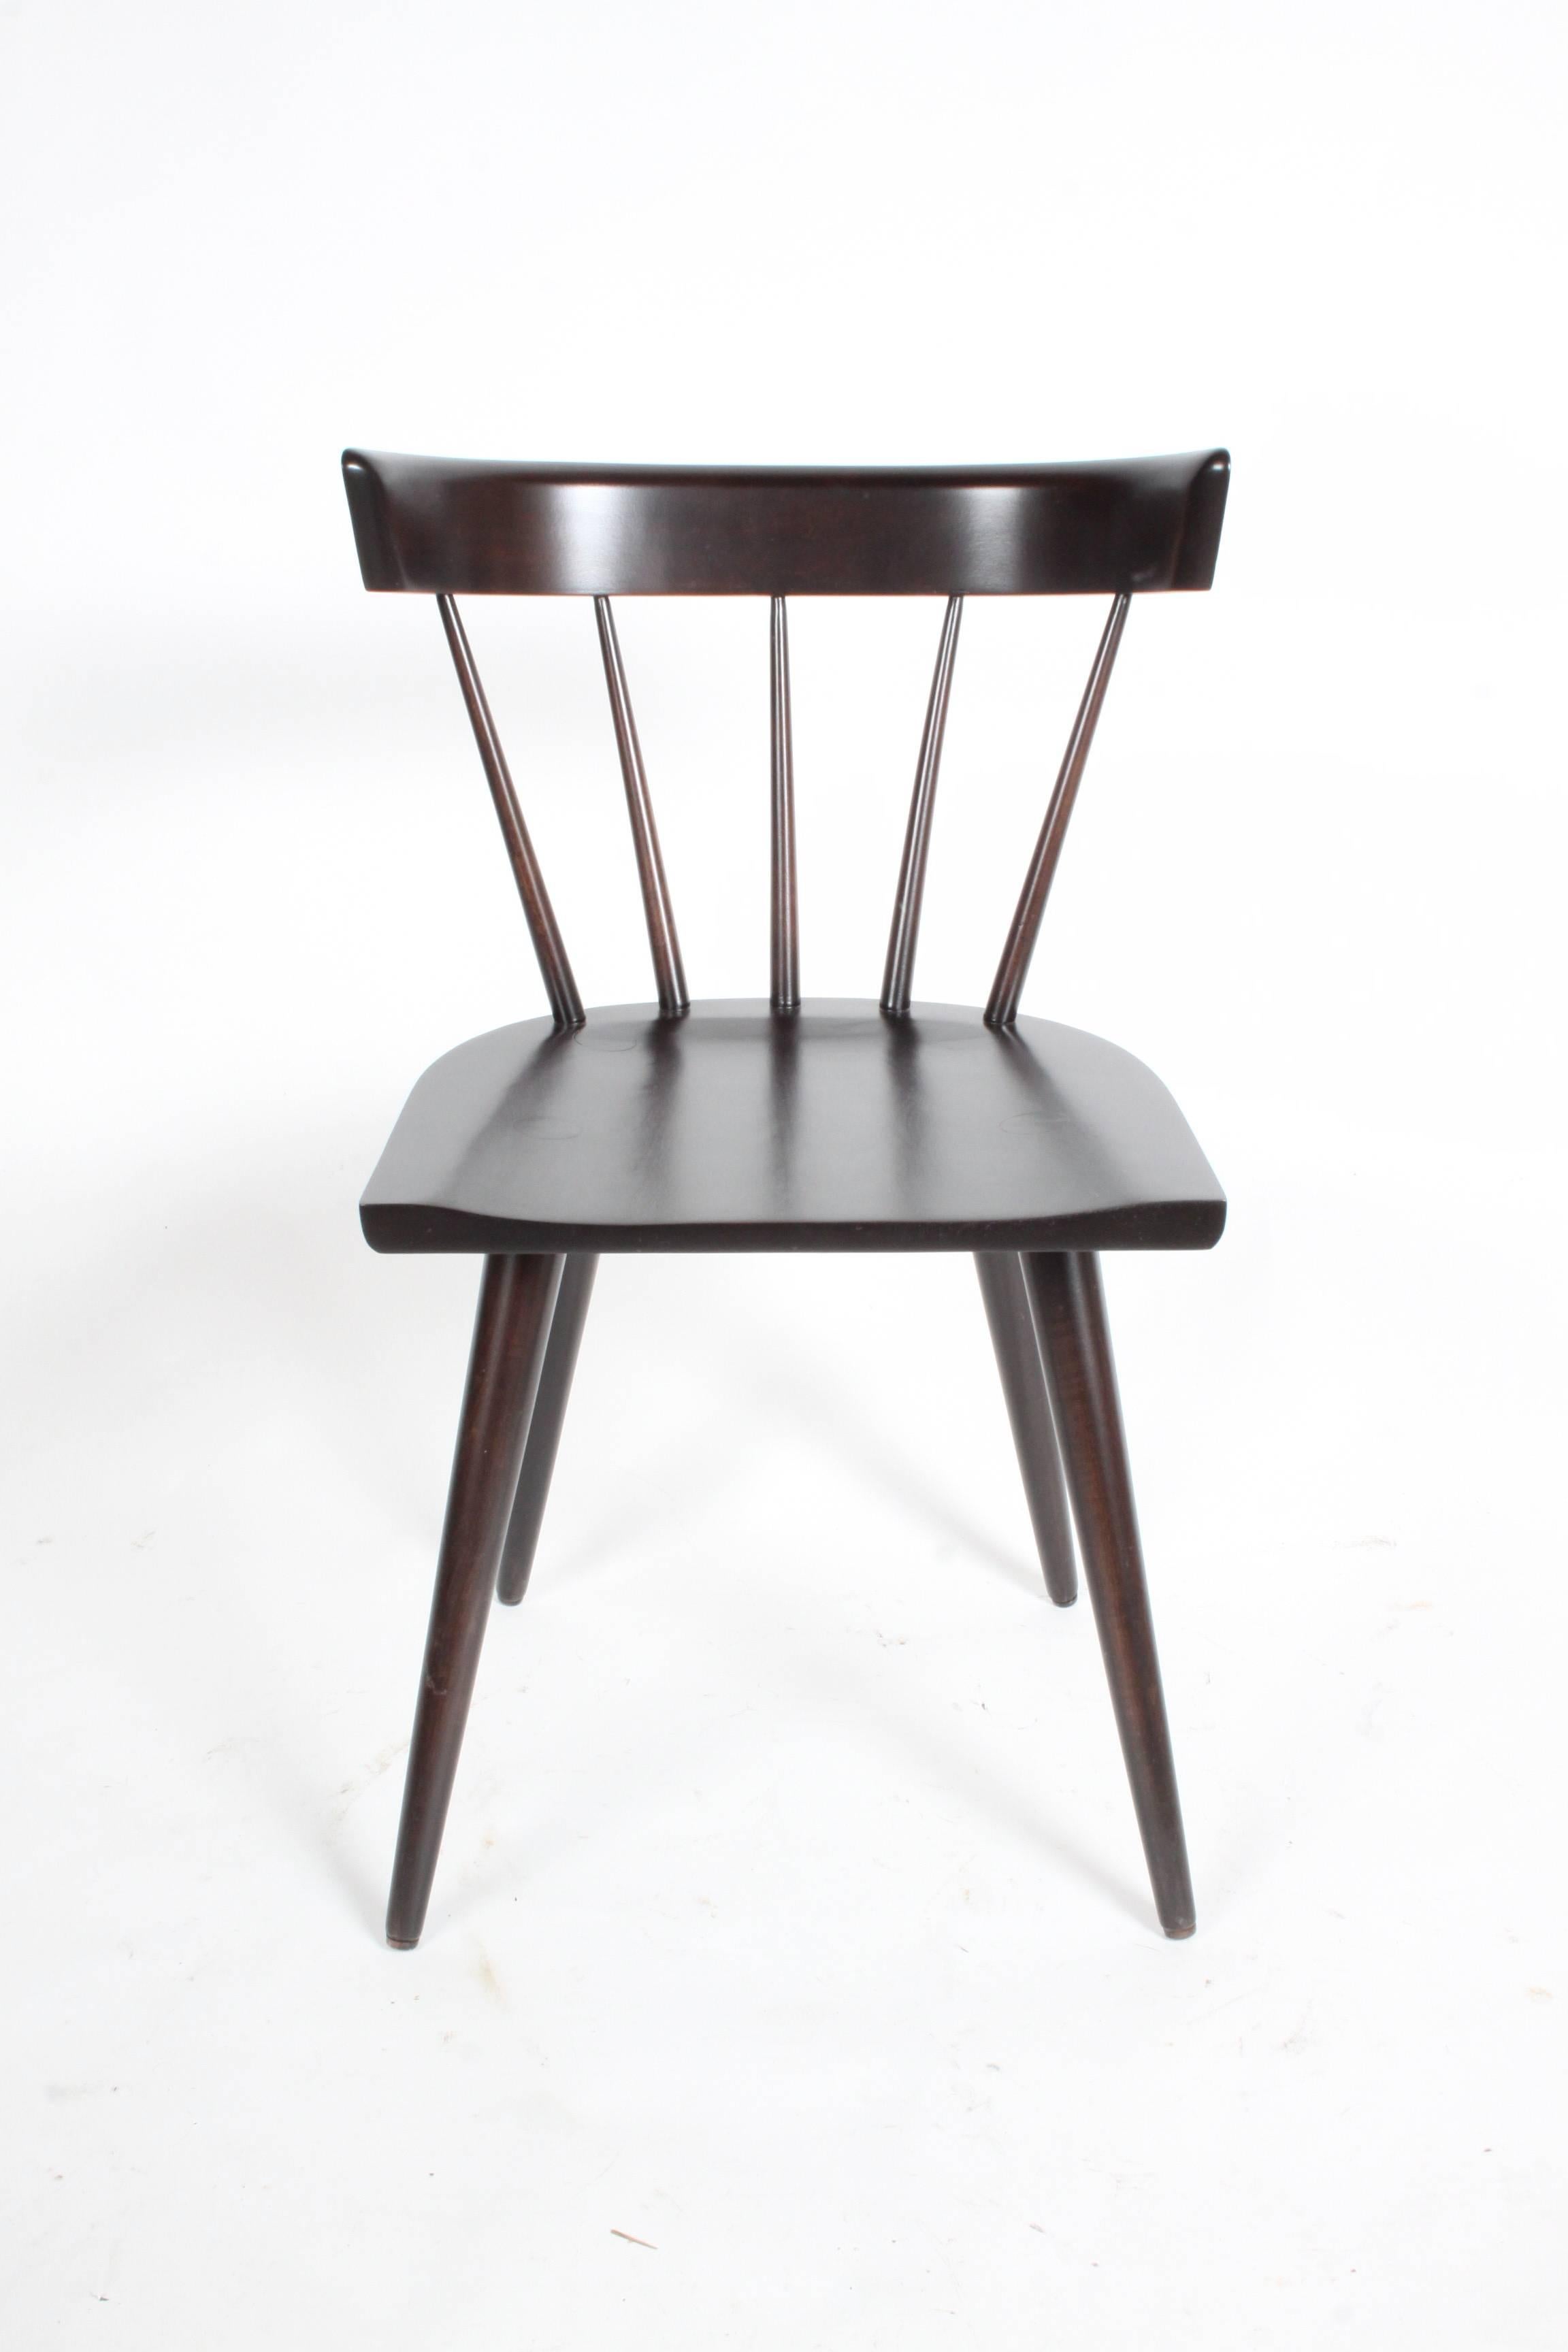 Set of four Paul McCobb for Planner Group dining chairs refinished in dark espresso finish, some chairs have labels.